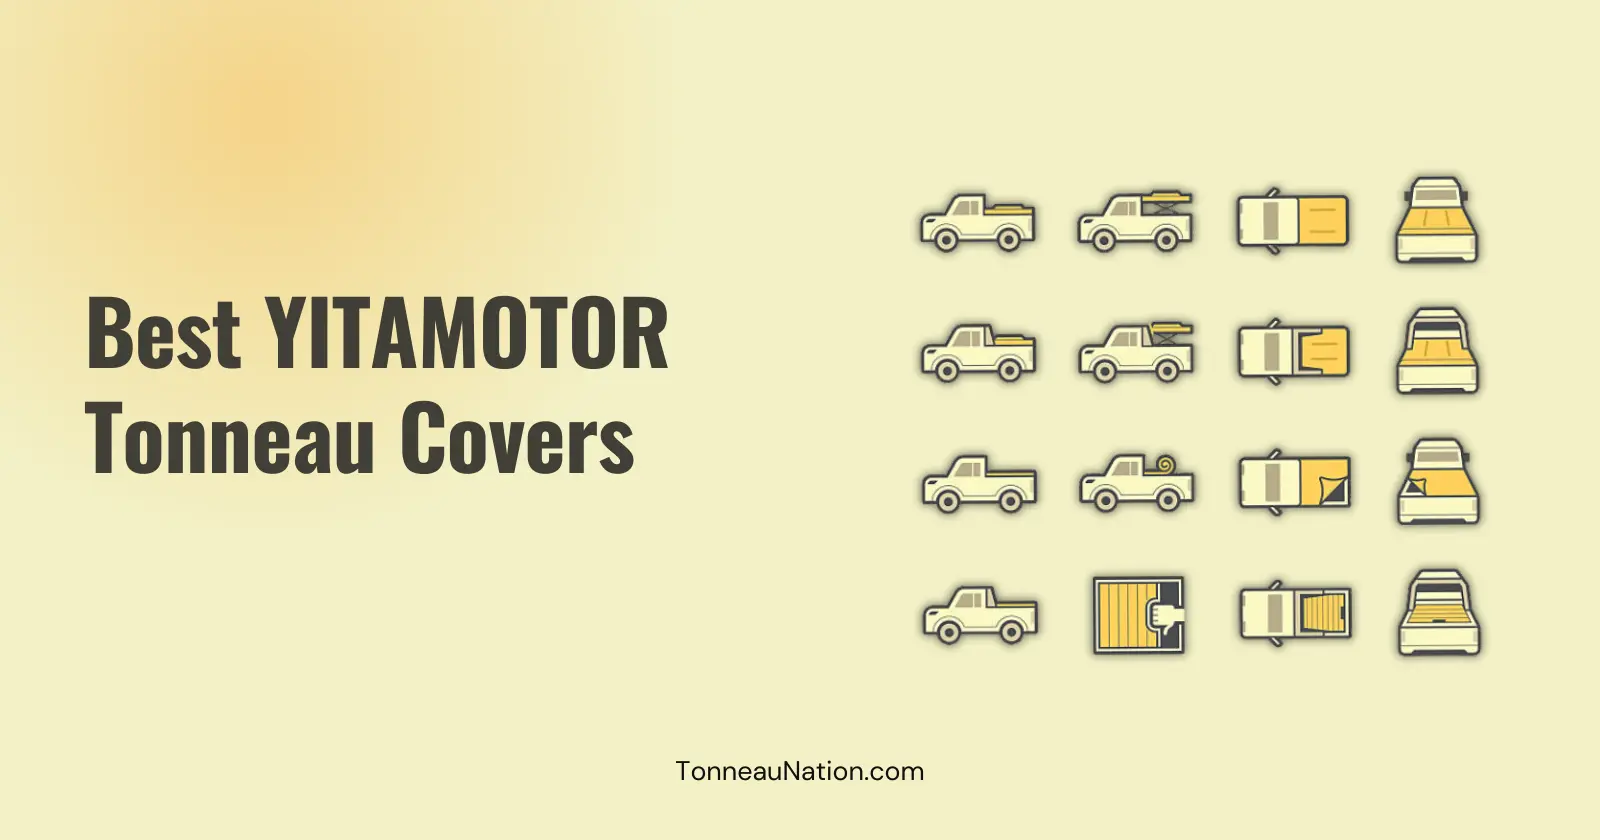 Tonneau cover from YITAMOTOR brand